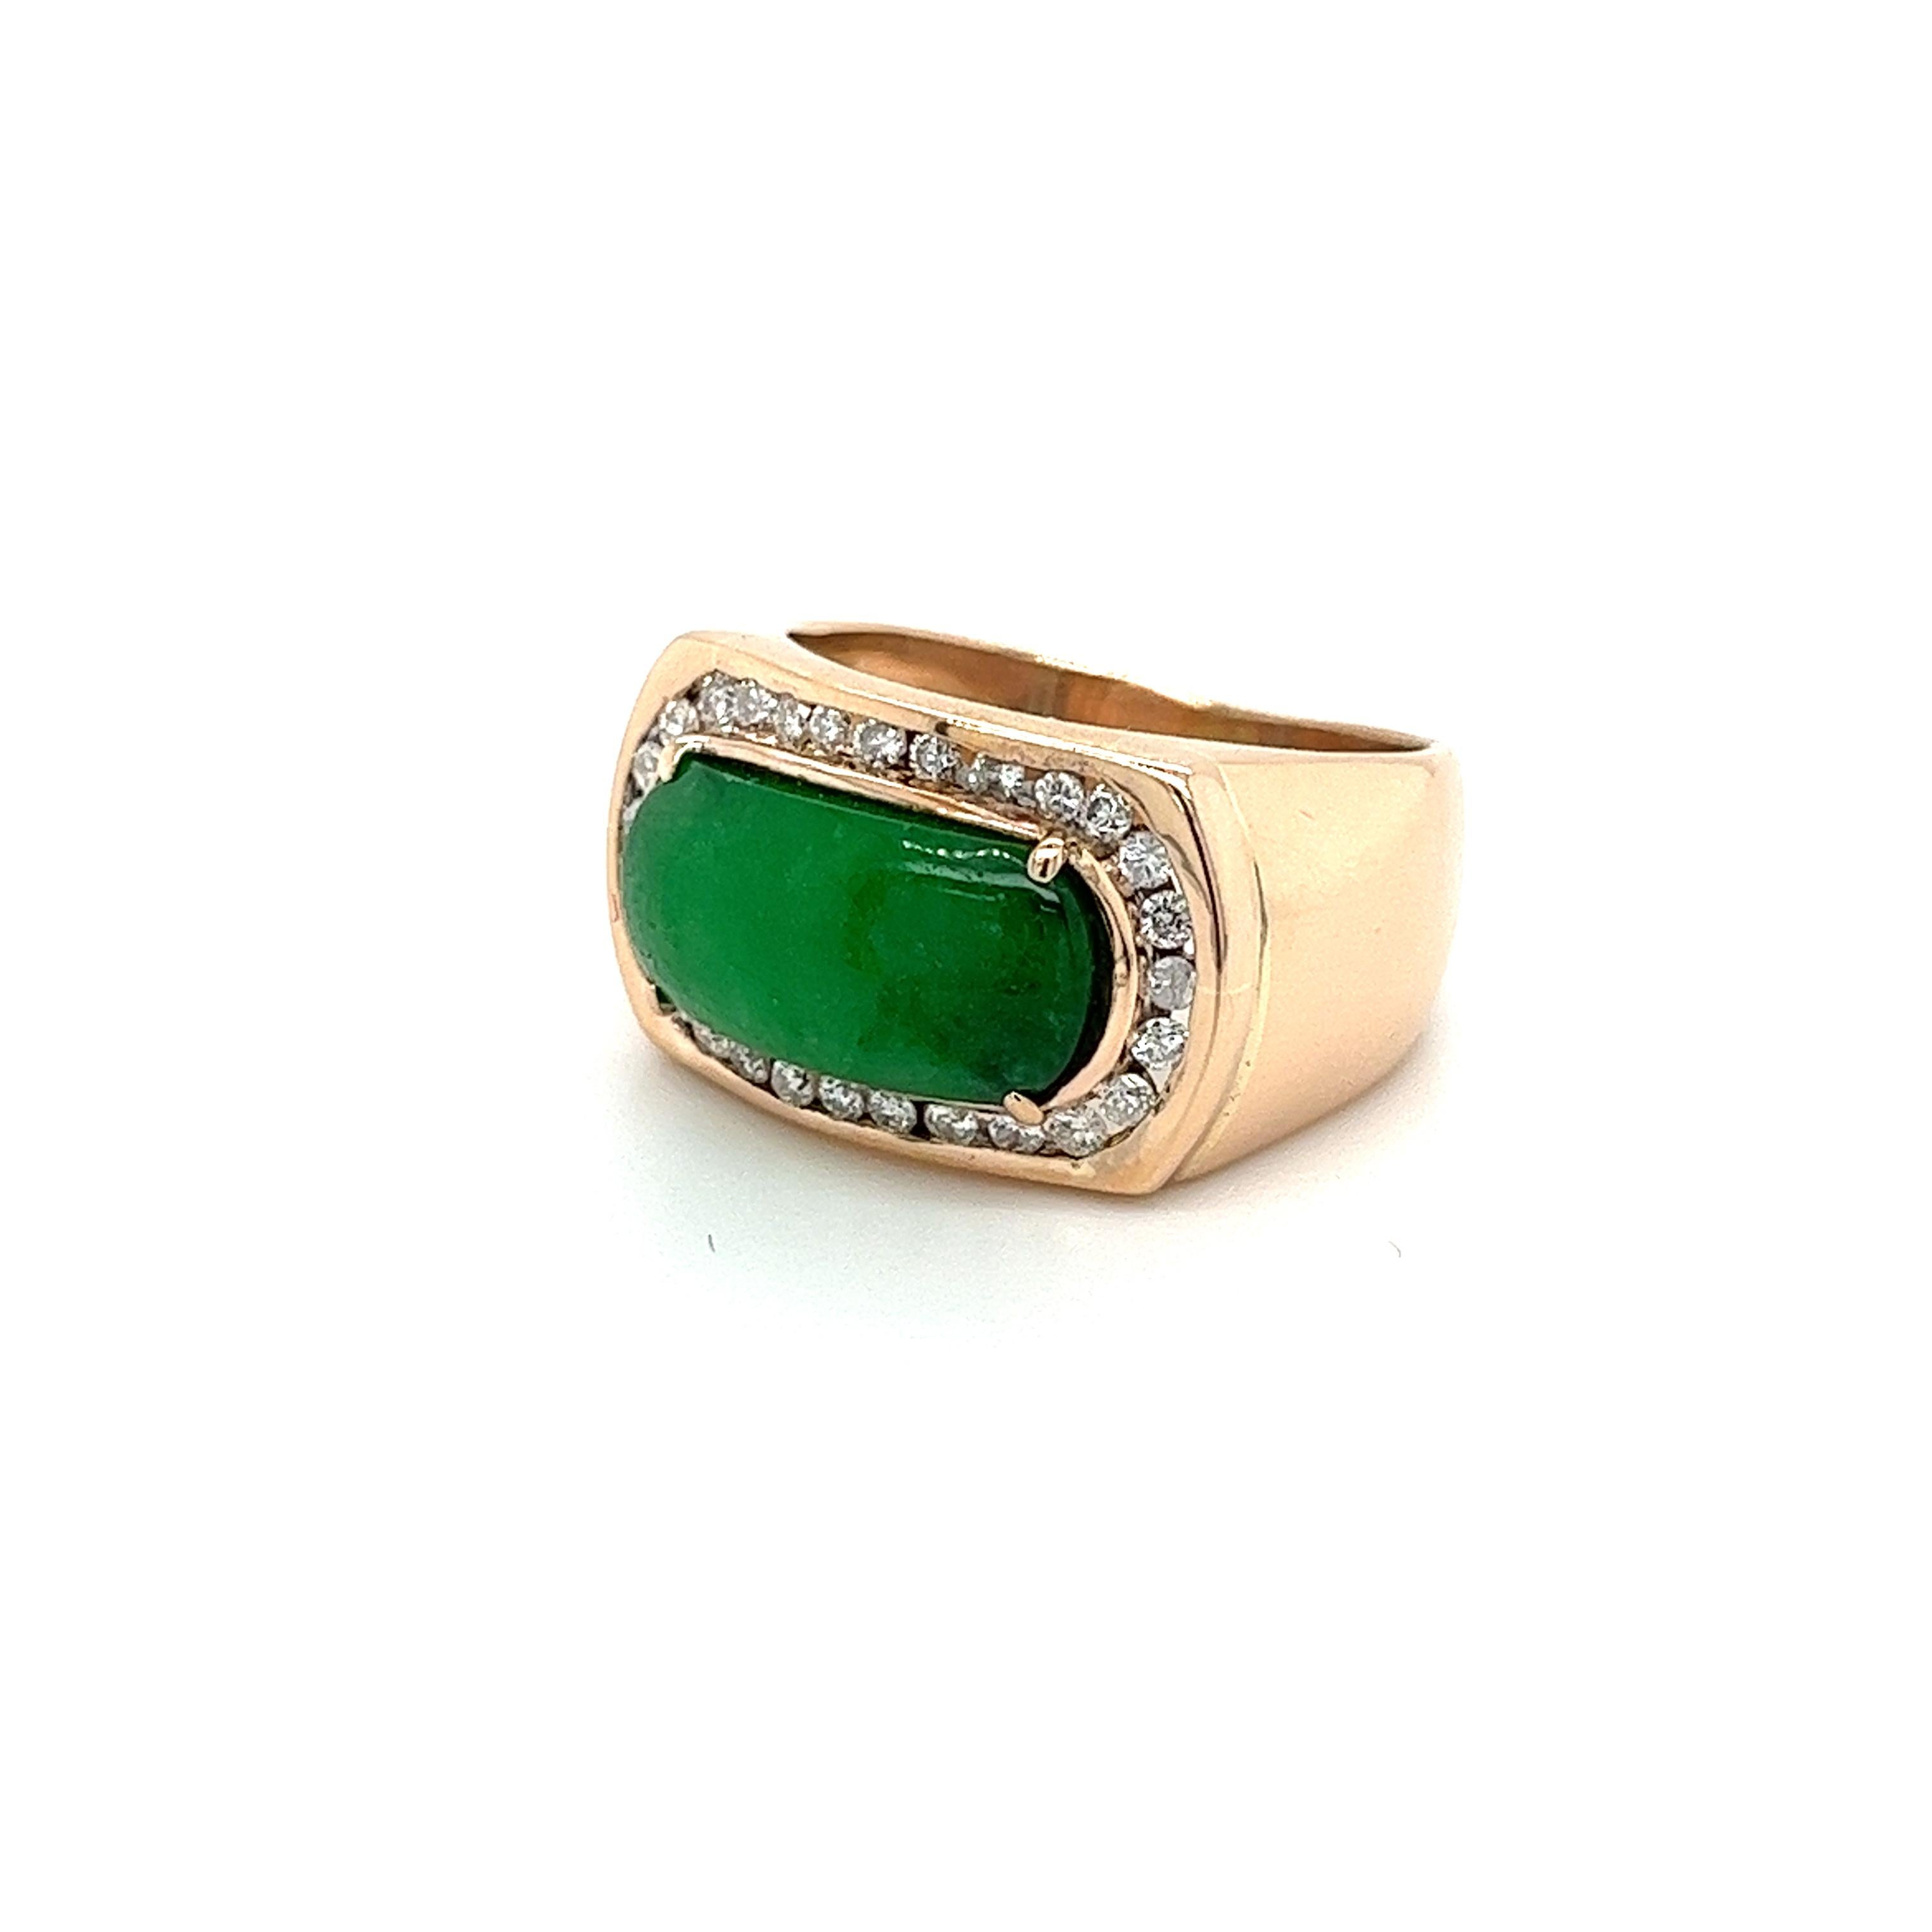 This exquisite 18K rose gold jadeite jade and diamond halo ring boasts a stunning horizontal cabochon jade center stone and is adorned with 28 channel set round cut diamonds totaling 0.50ctw. The ring face measures 20 x 12.7mm and the entire piece